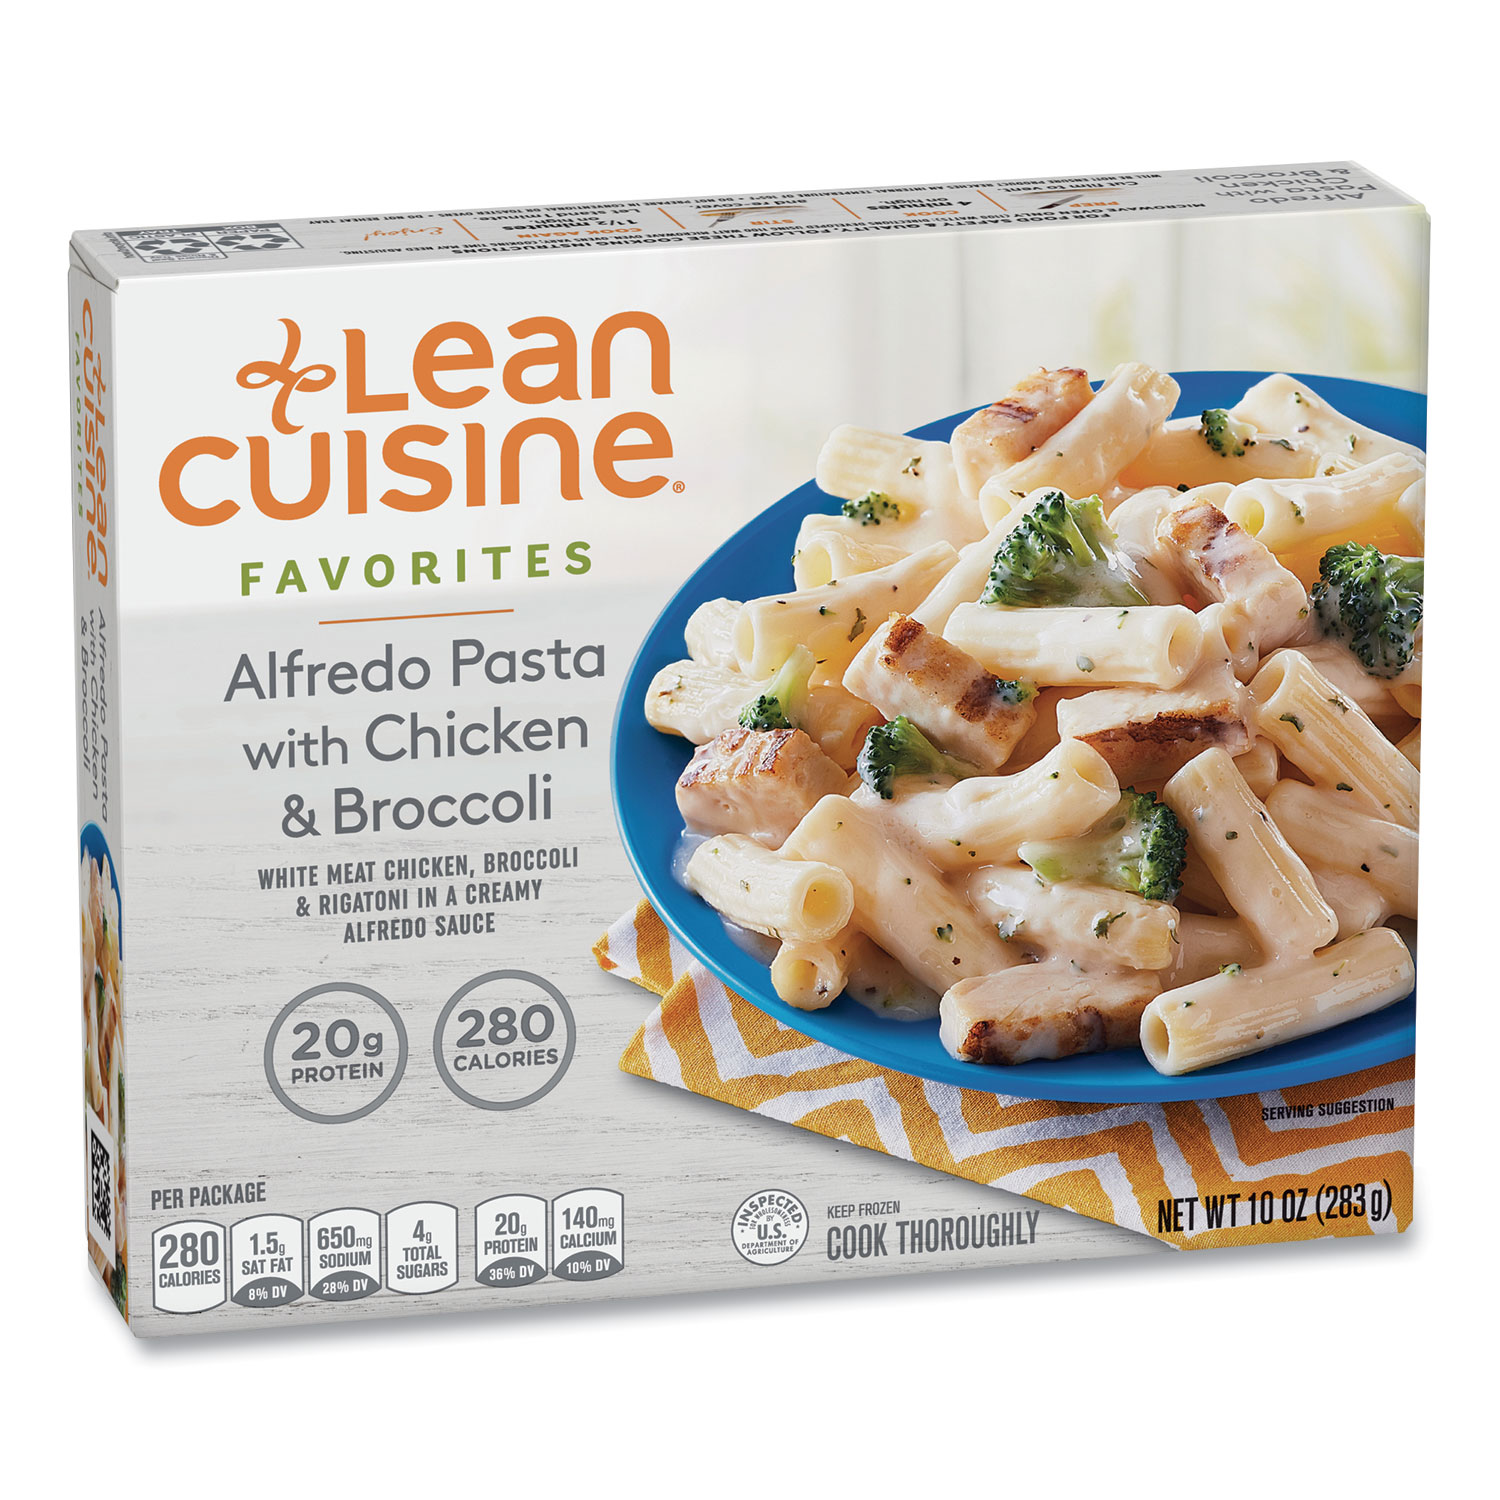  Lean Cuisine 174199 Favorites Alfredo Pasta with Chicken and Broccoli, 10 oz Box, 3 Boxes/Pack, Free Delivery in 1-4 Business Days (GRR90300118) 